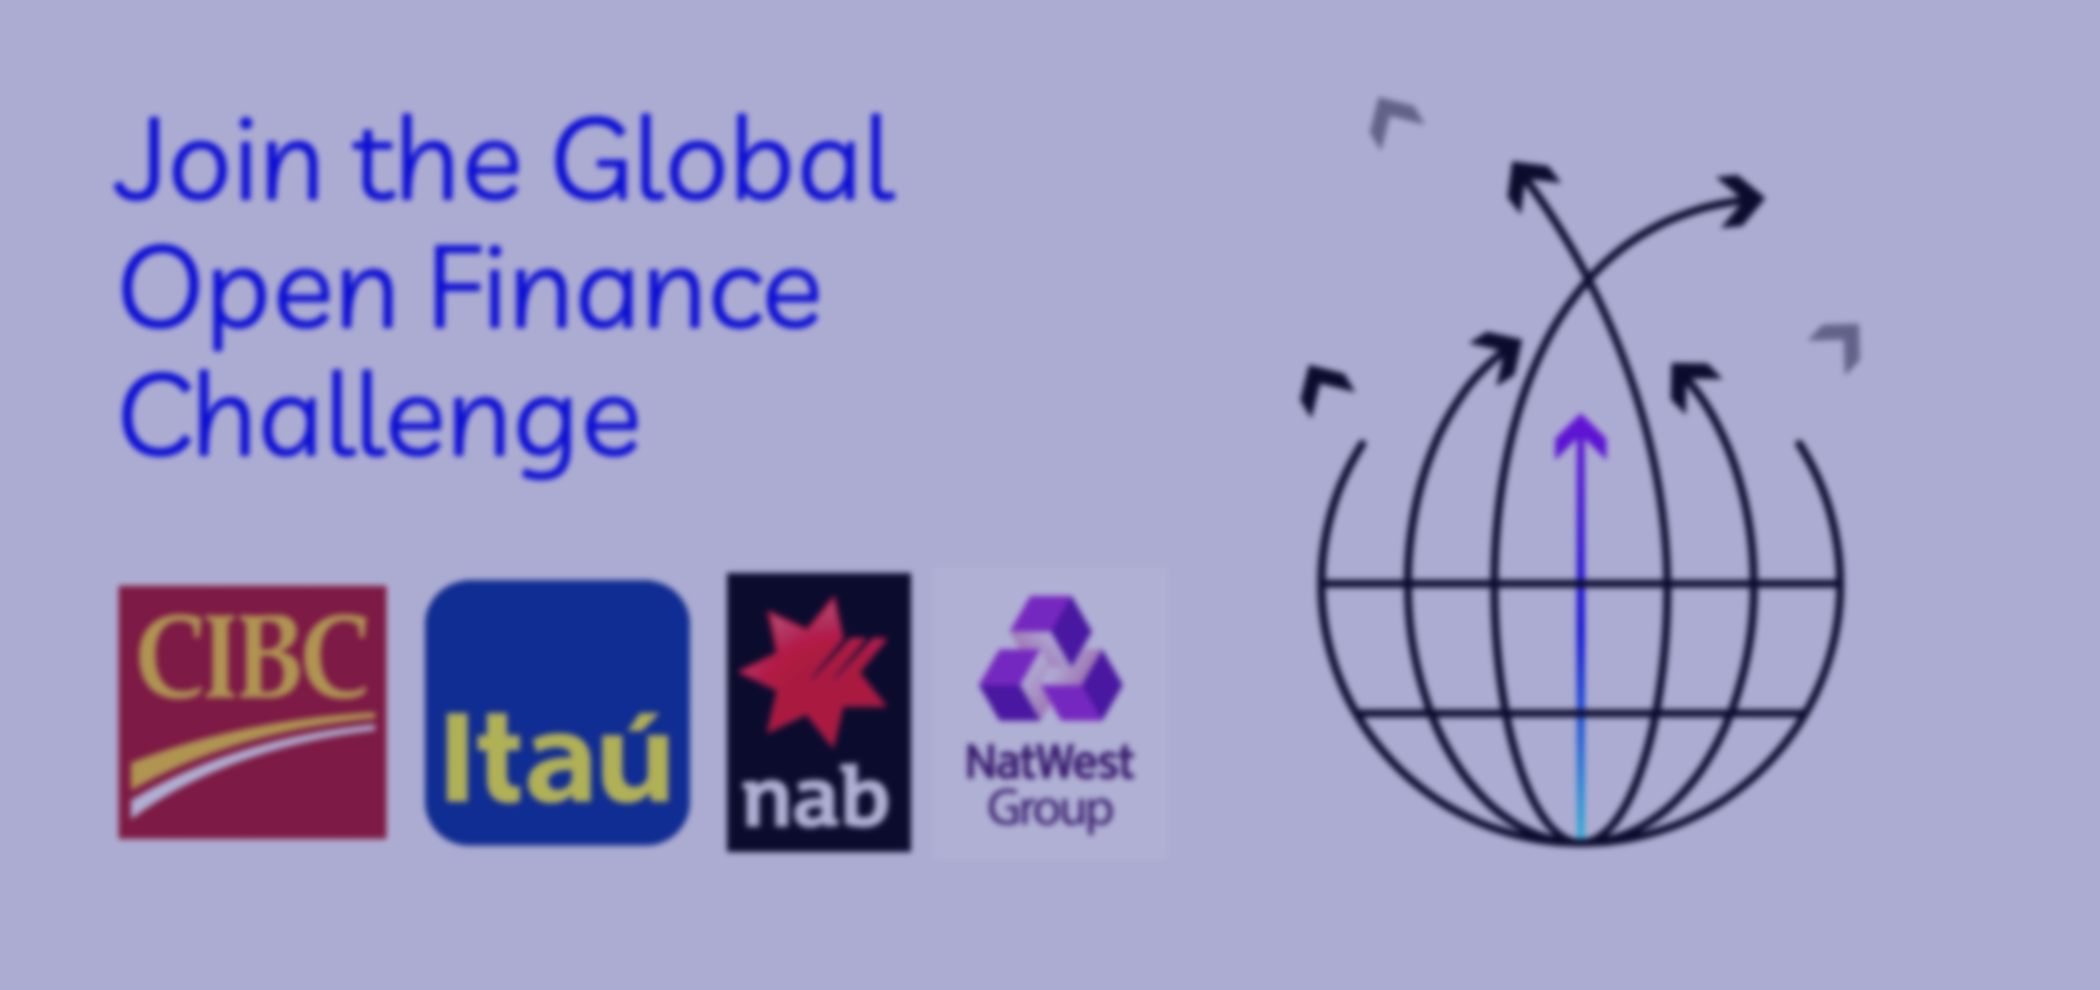 ebpSource reaches the semi-finals of the Global Open Finance Challenge 2021